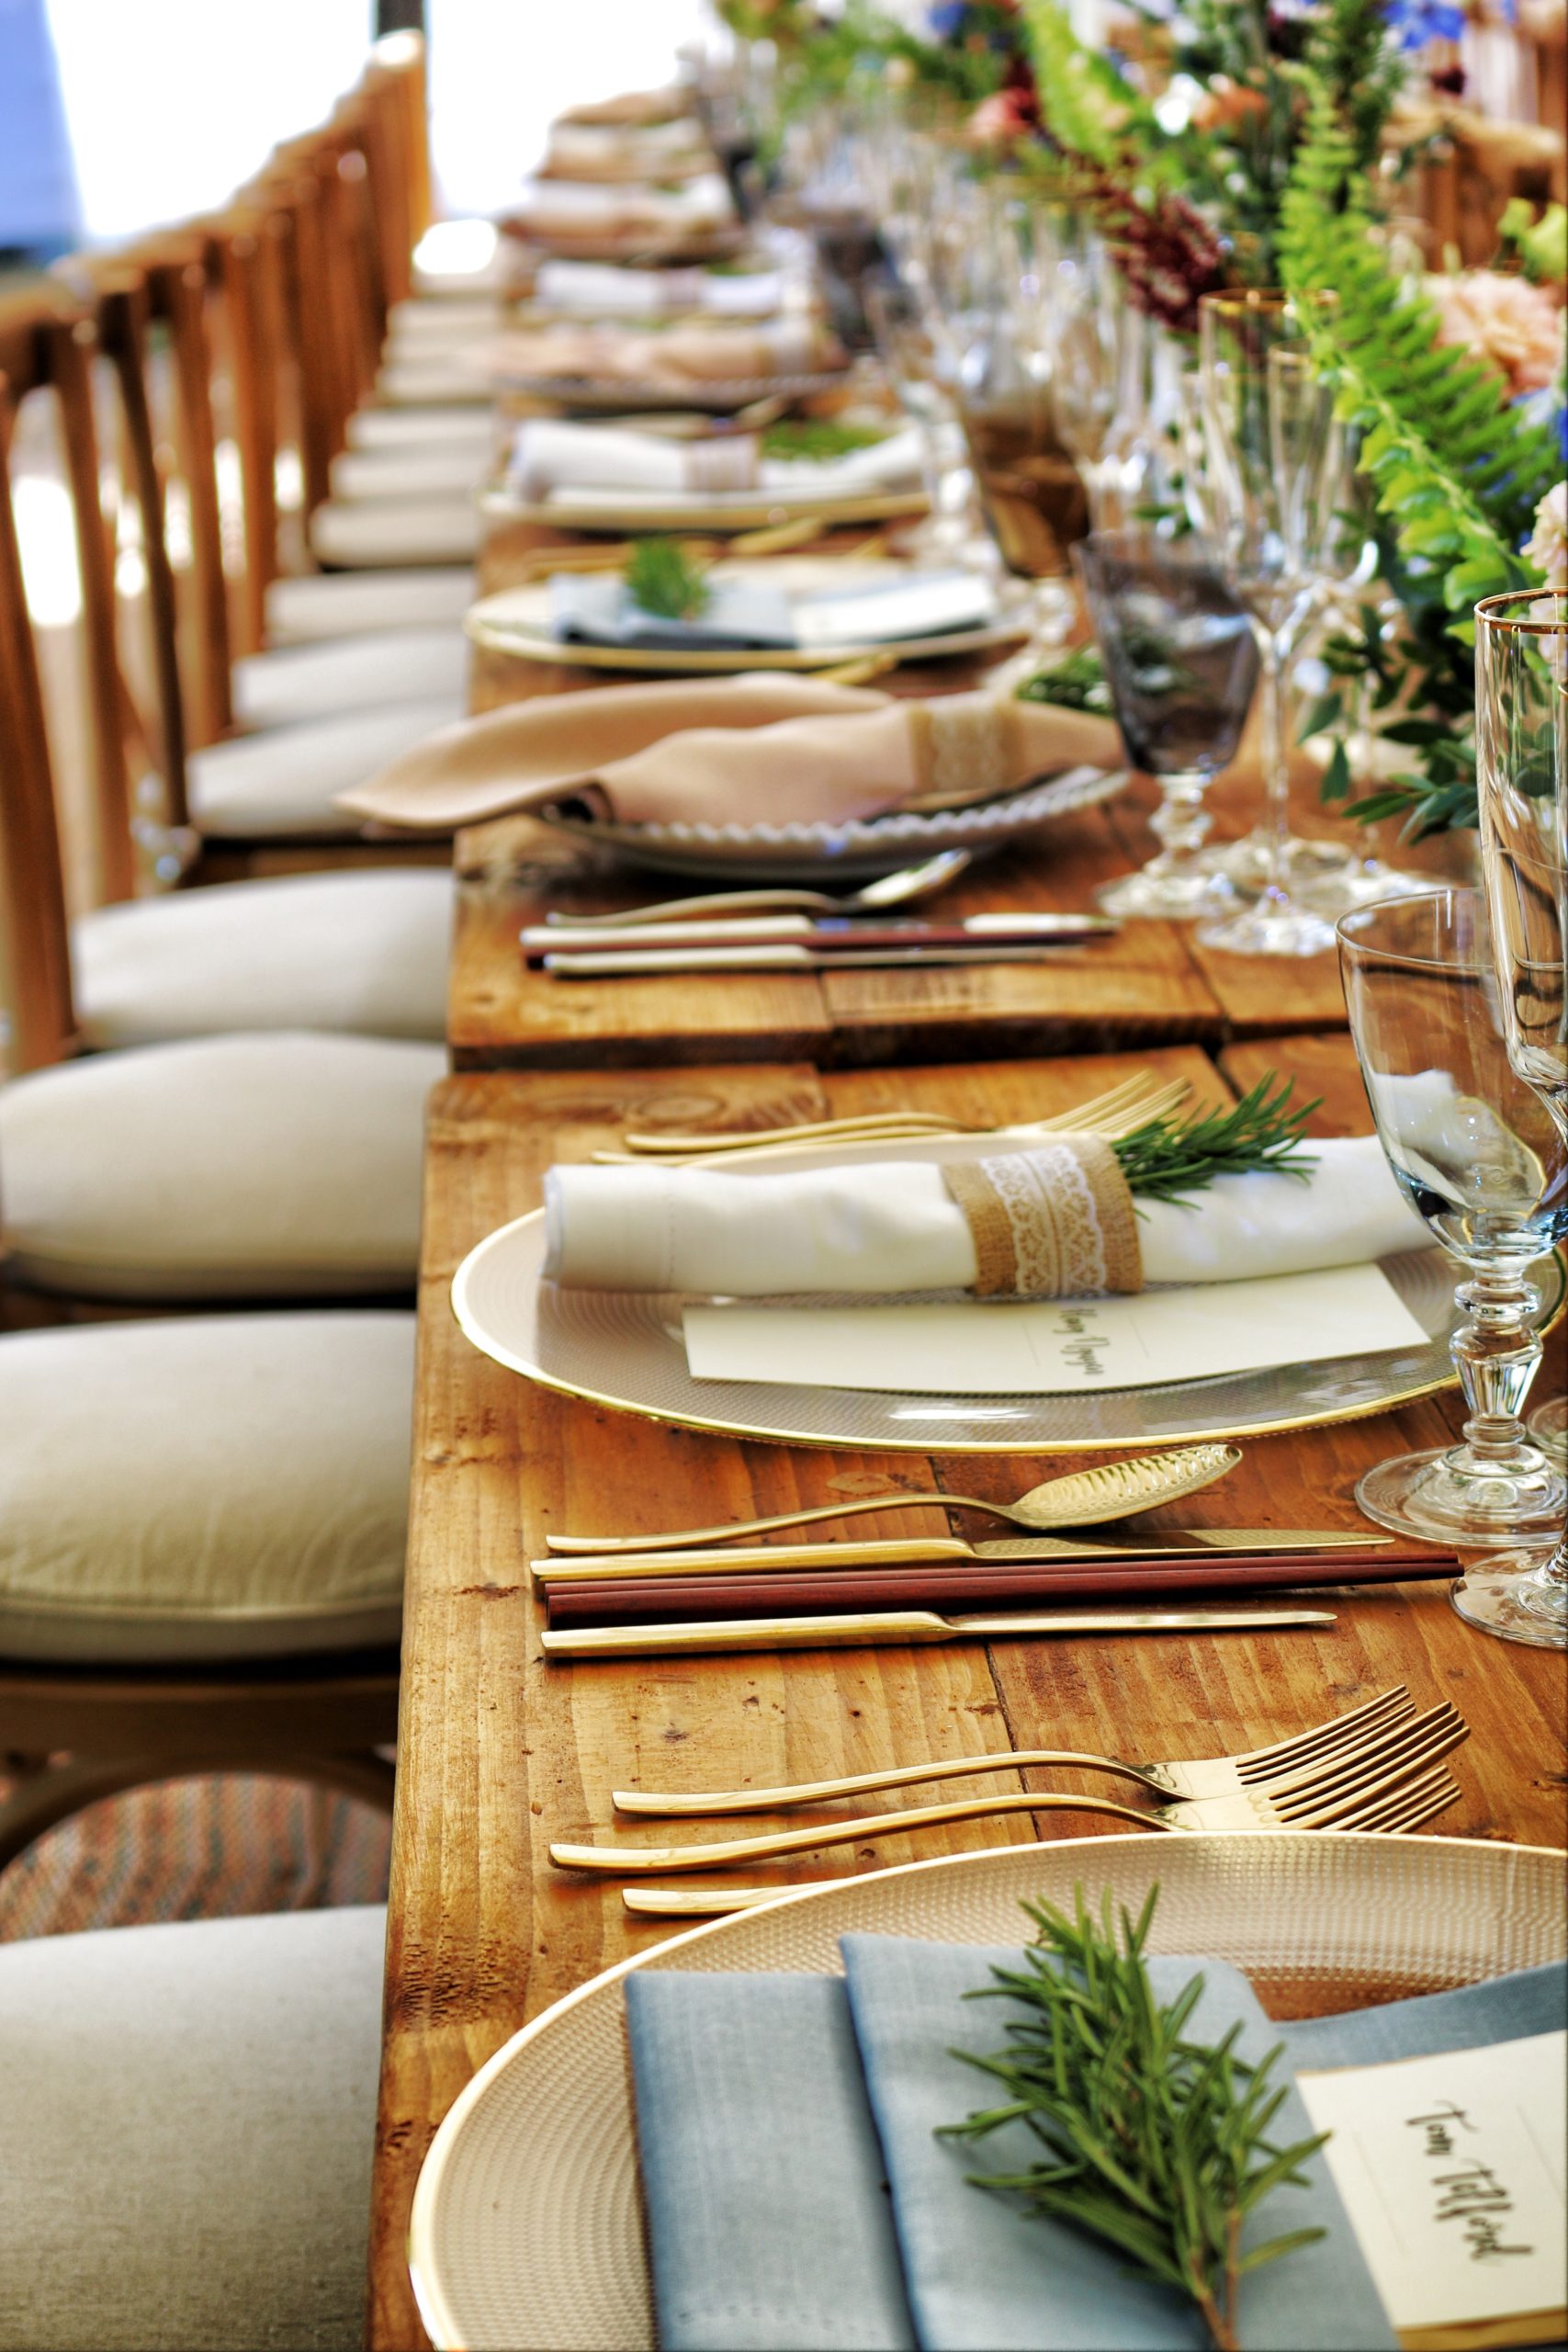 Personalized place settings will make your guests feel special.